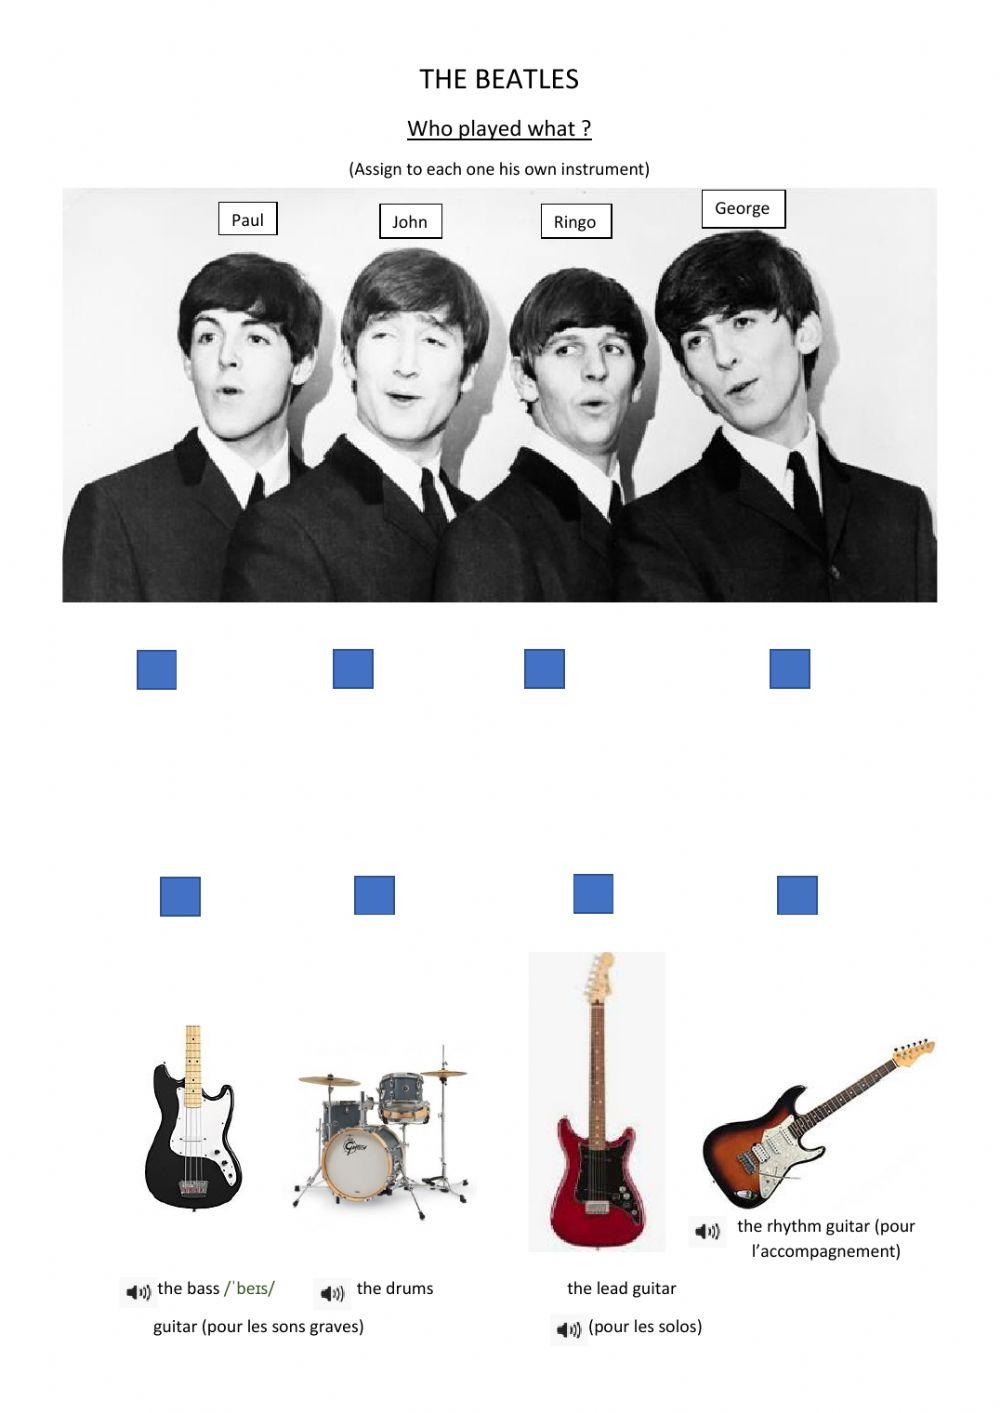 The Beatles: who played what?